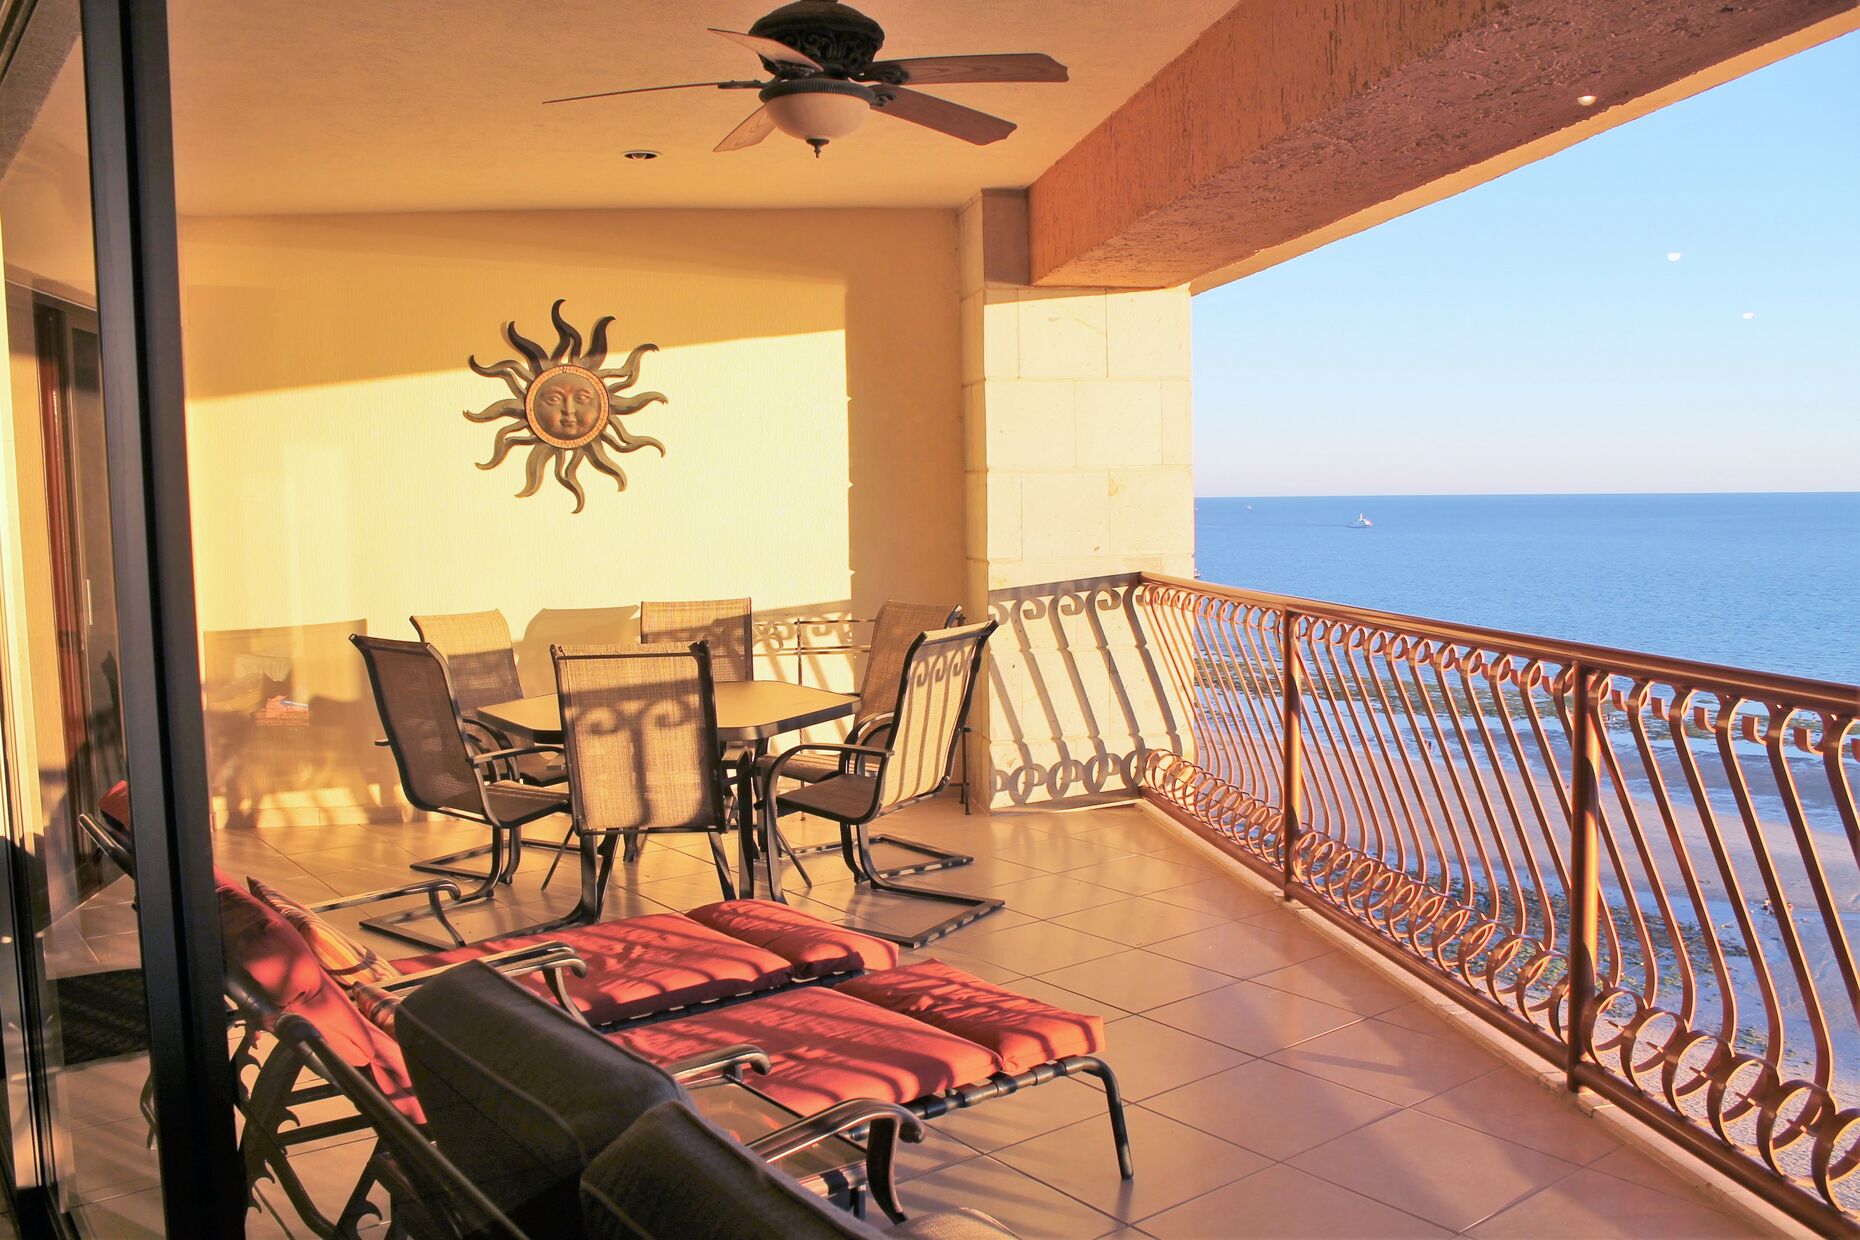 Balcony - outdoor dining table, chaise lounge chairs and plenty of seating.